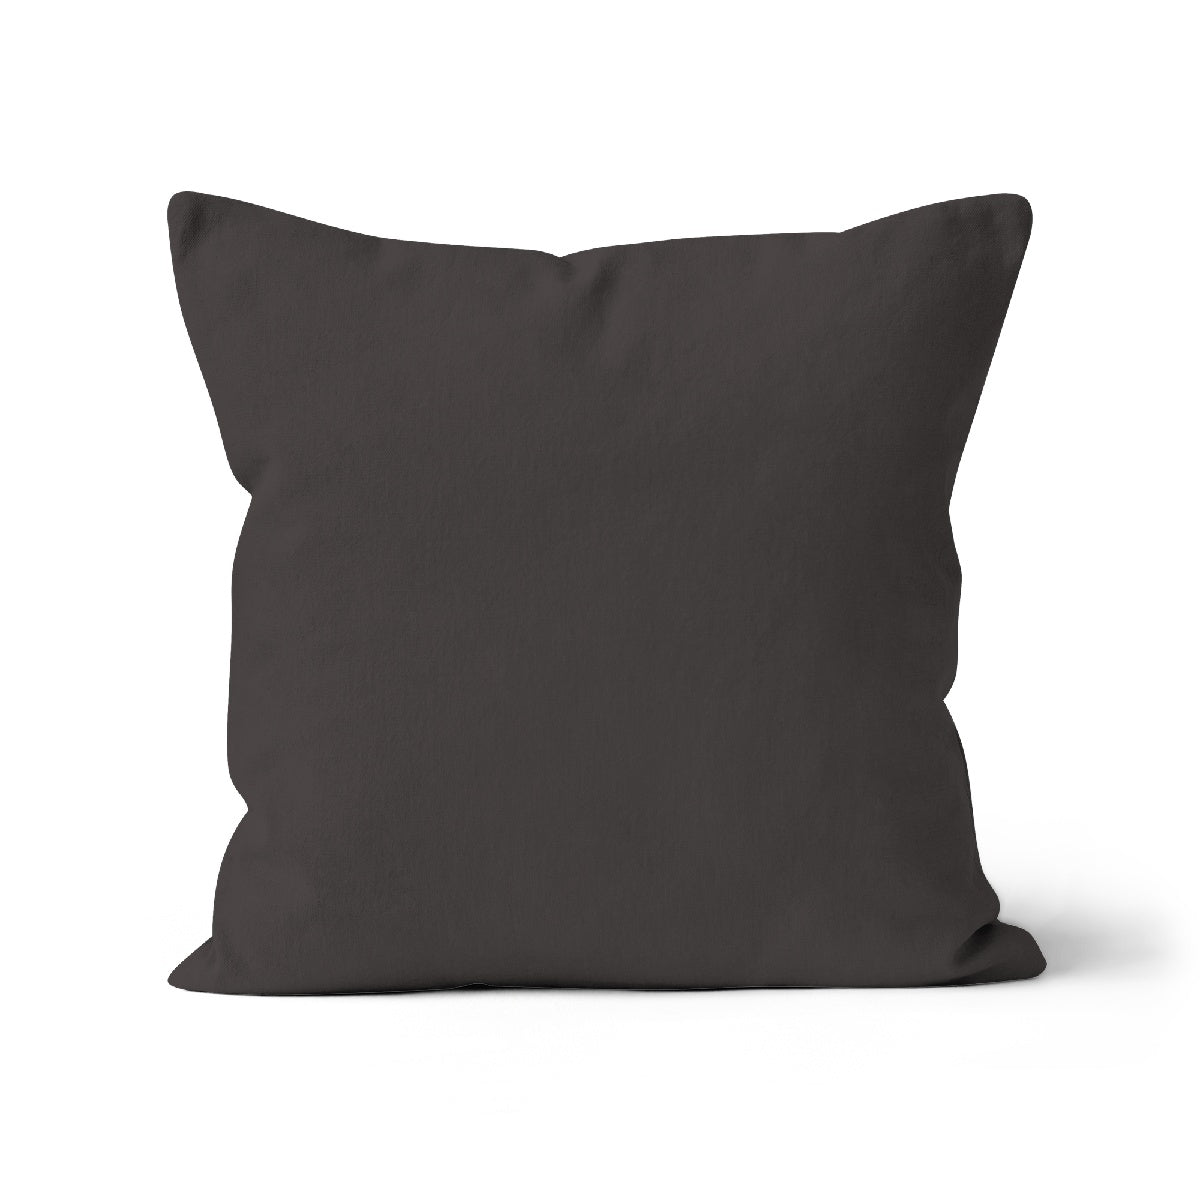 Smokey grey cotton cushion cover. Plain colour, 100% organic cotton. Washable, removable, made in the UK.